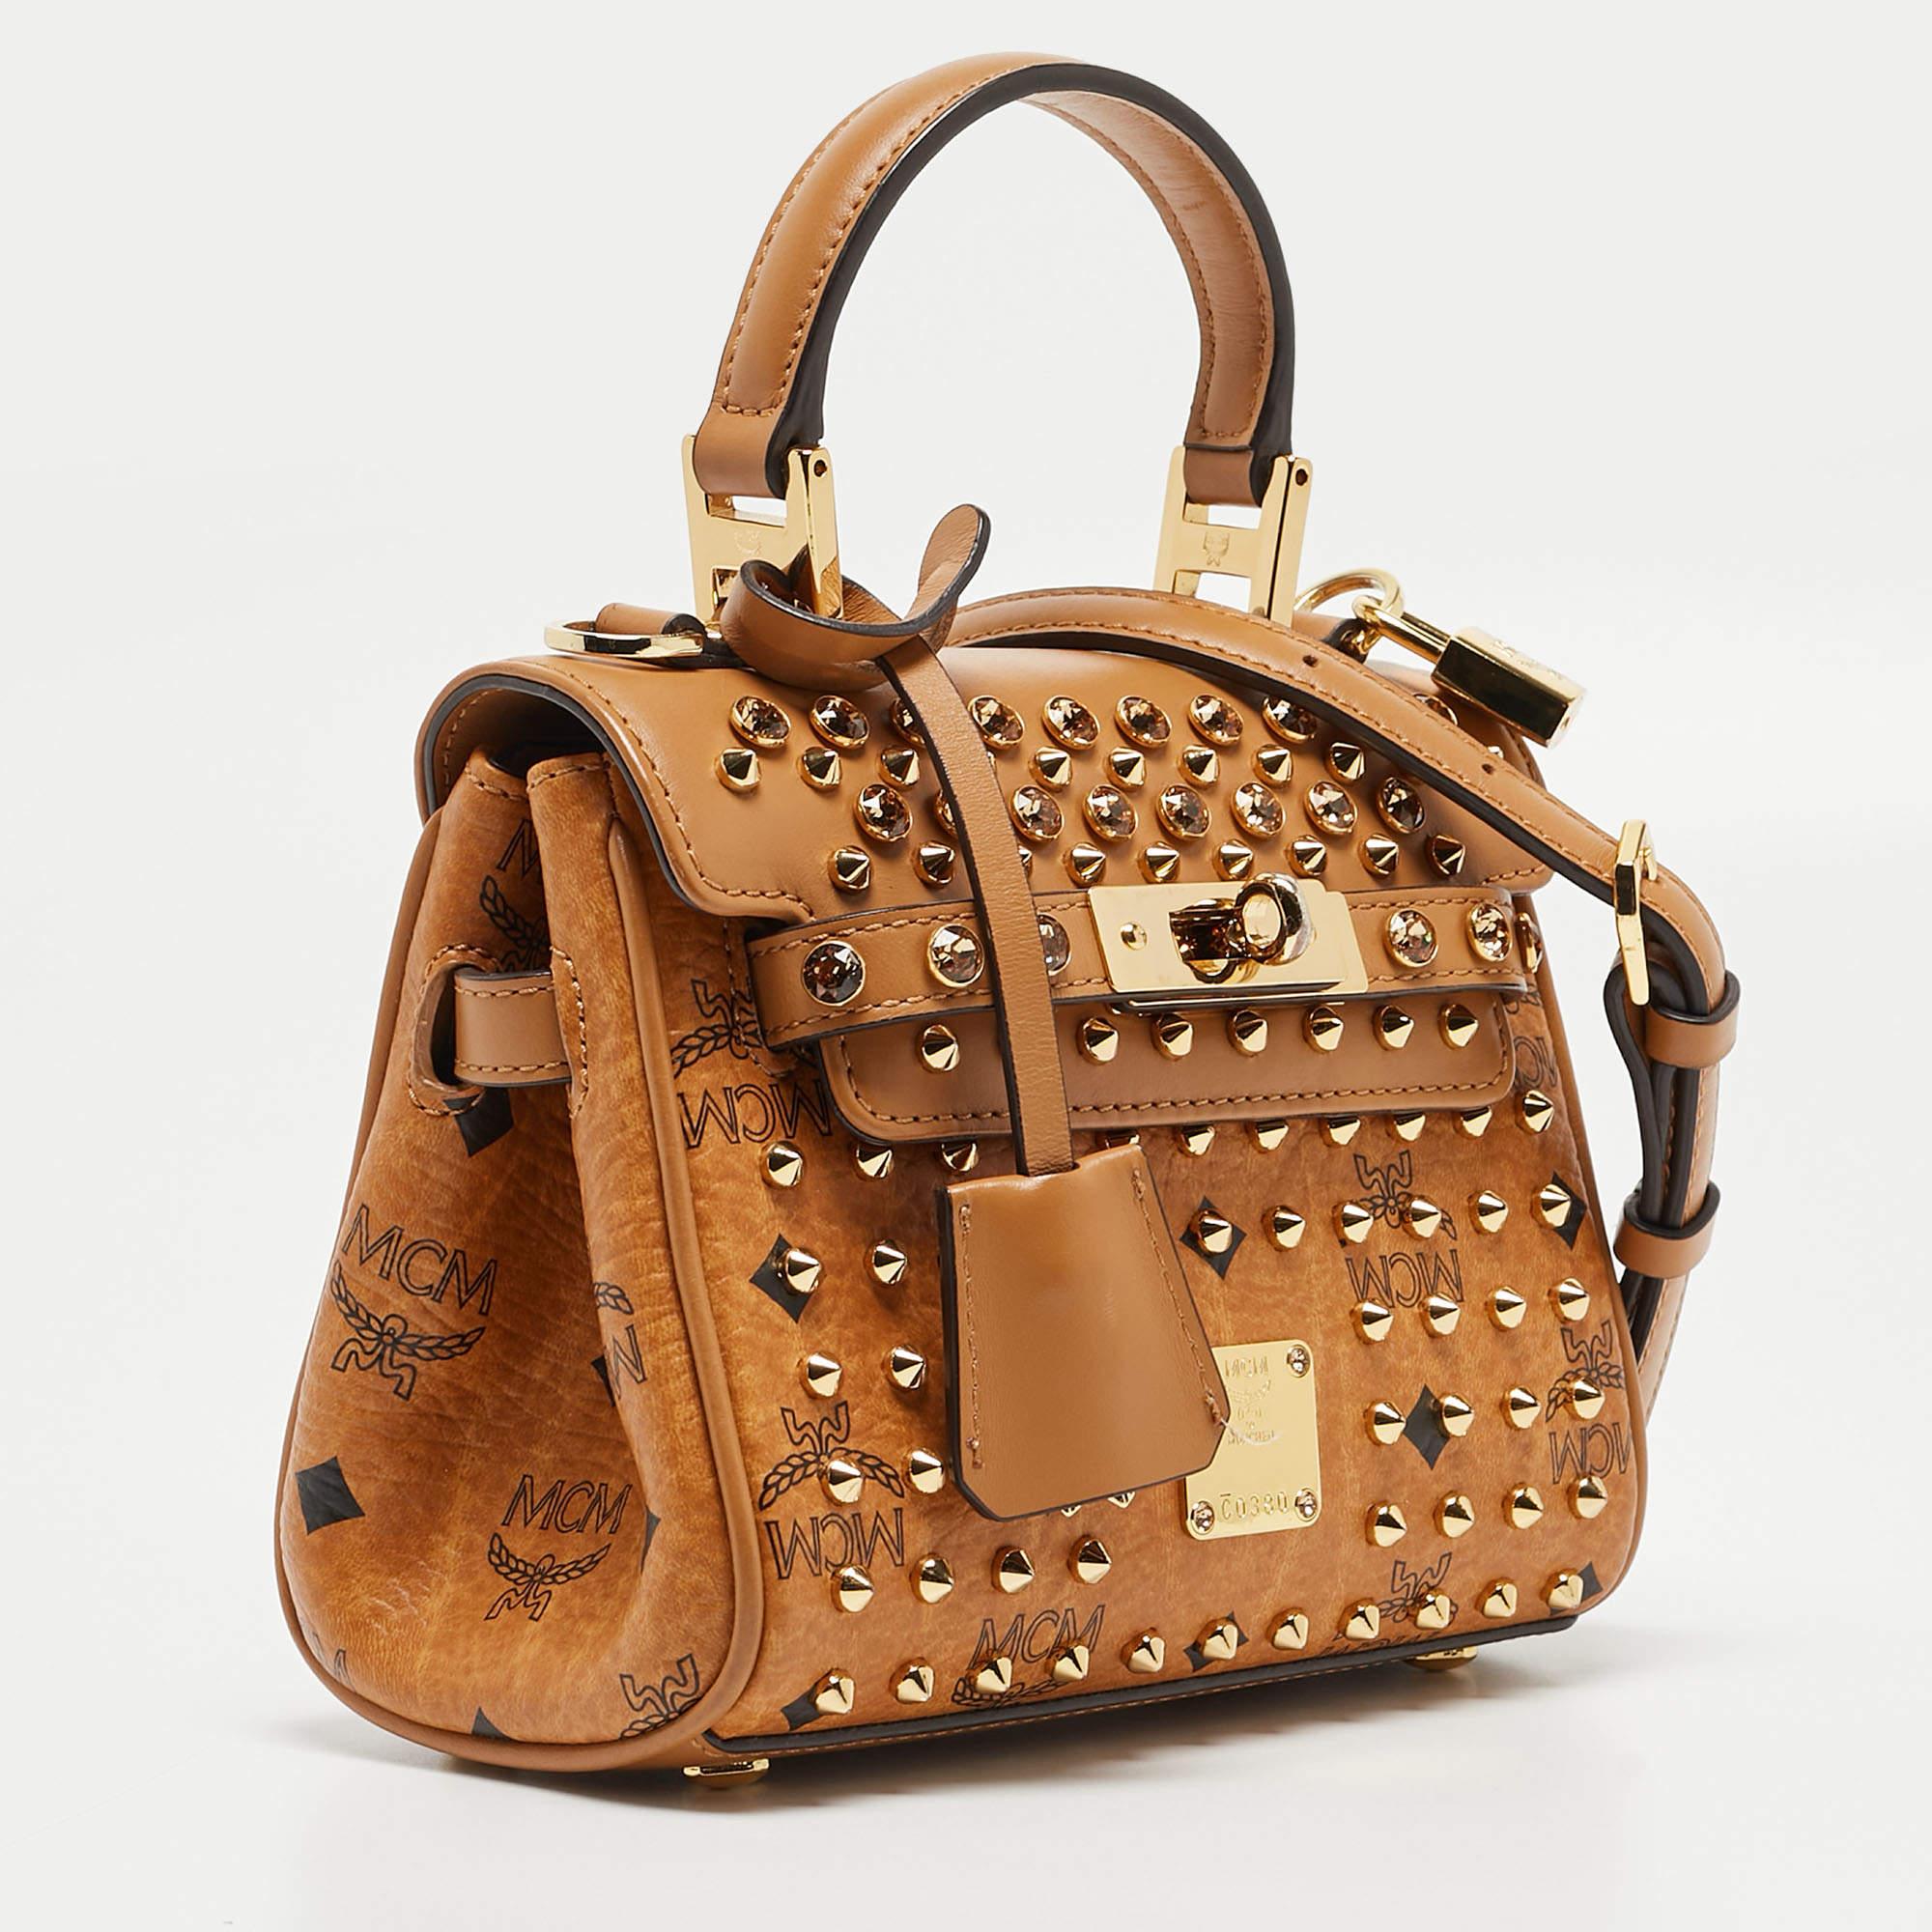 Ensure your day's essentials are in order and your outfit is complete with this MCM bag. Crafted using the best materials, the bag carries the maison's signature of artful craftsmanship and enduring appeal.

